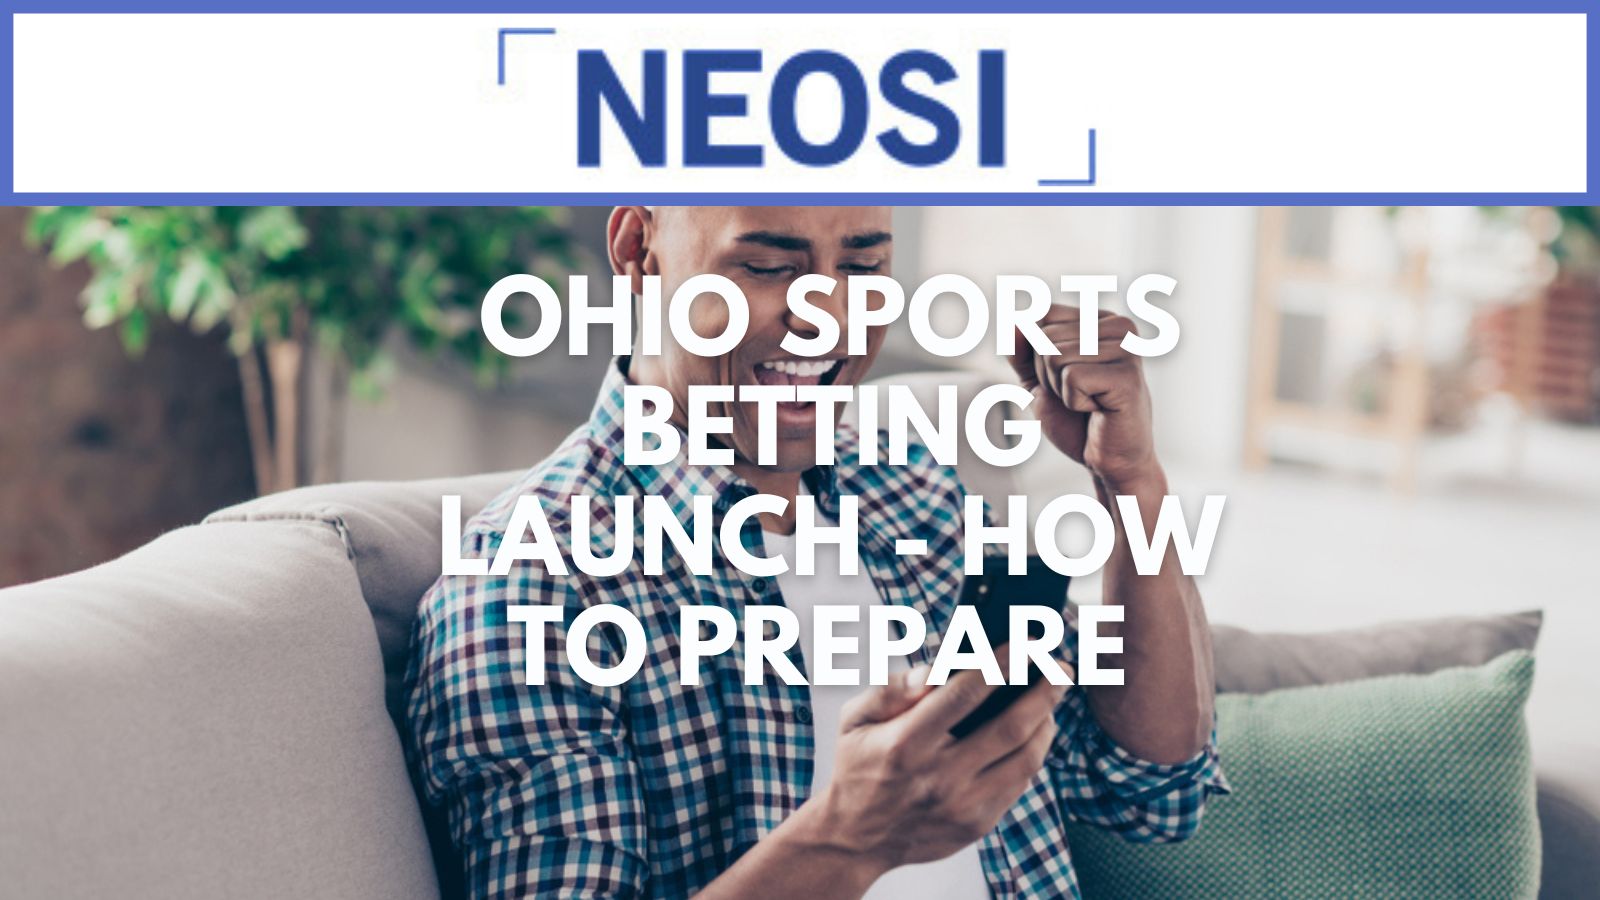 30 Days Until Ohio Sports Betting Launch - How To Prepare